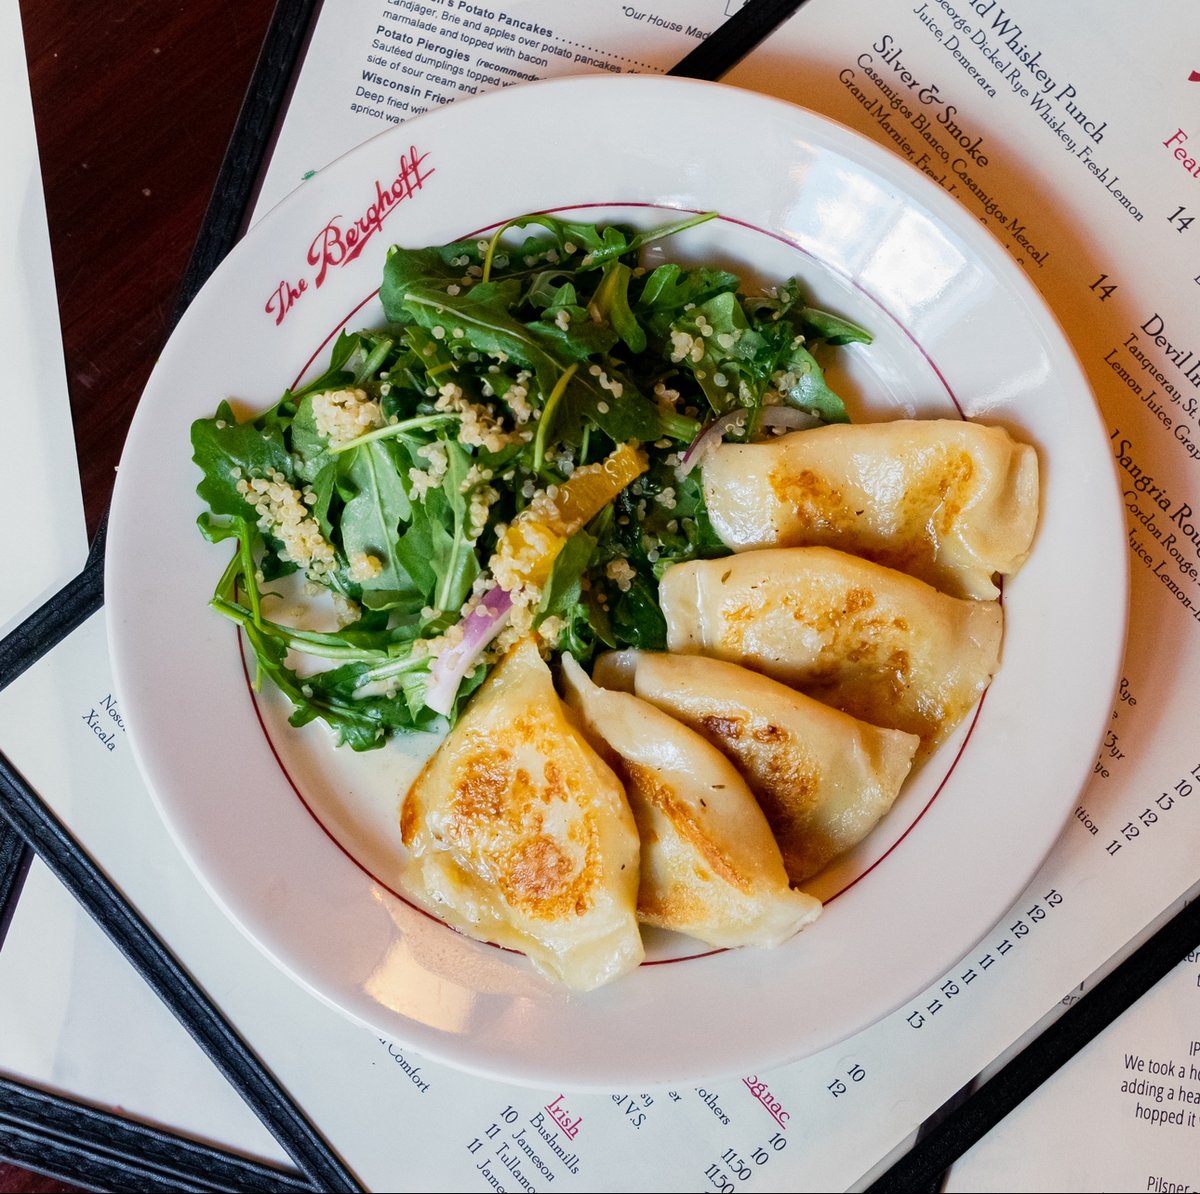 Join us for lunch!  🥗 

Our favorite appetizer today?  Potato Pierogies, sautéed dumplings topped with a beurre blanc sauce served with a quinoa and arugula salad.  We just can’t have enough of them! 

Ausgezeichnet! 

#TheLoop #GermanFare #ChicagoLoopAlliance #lunch